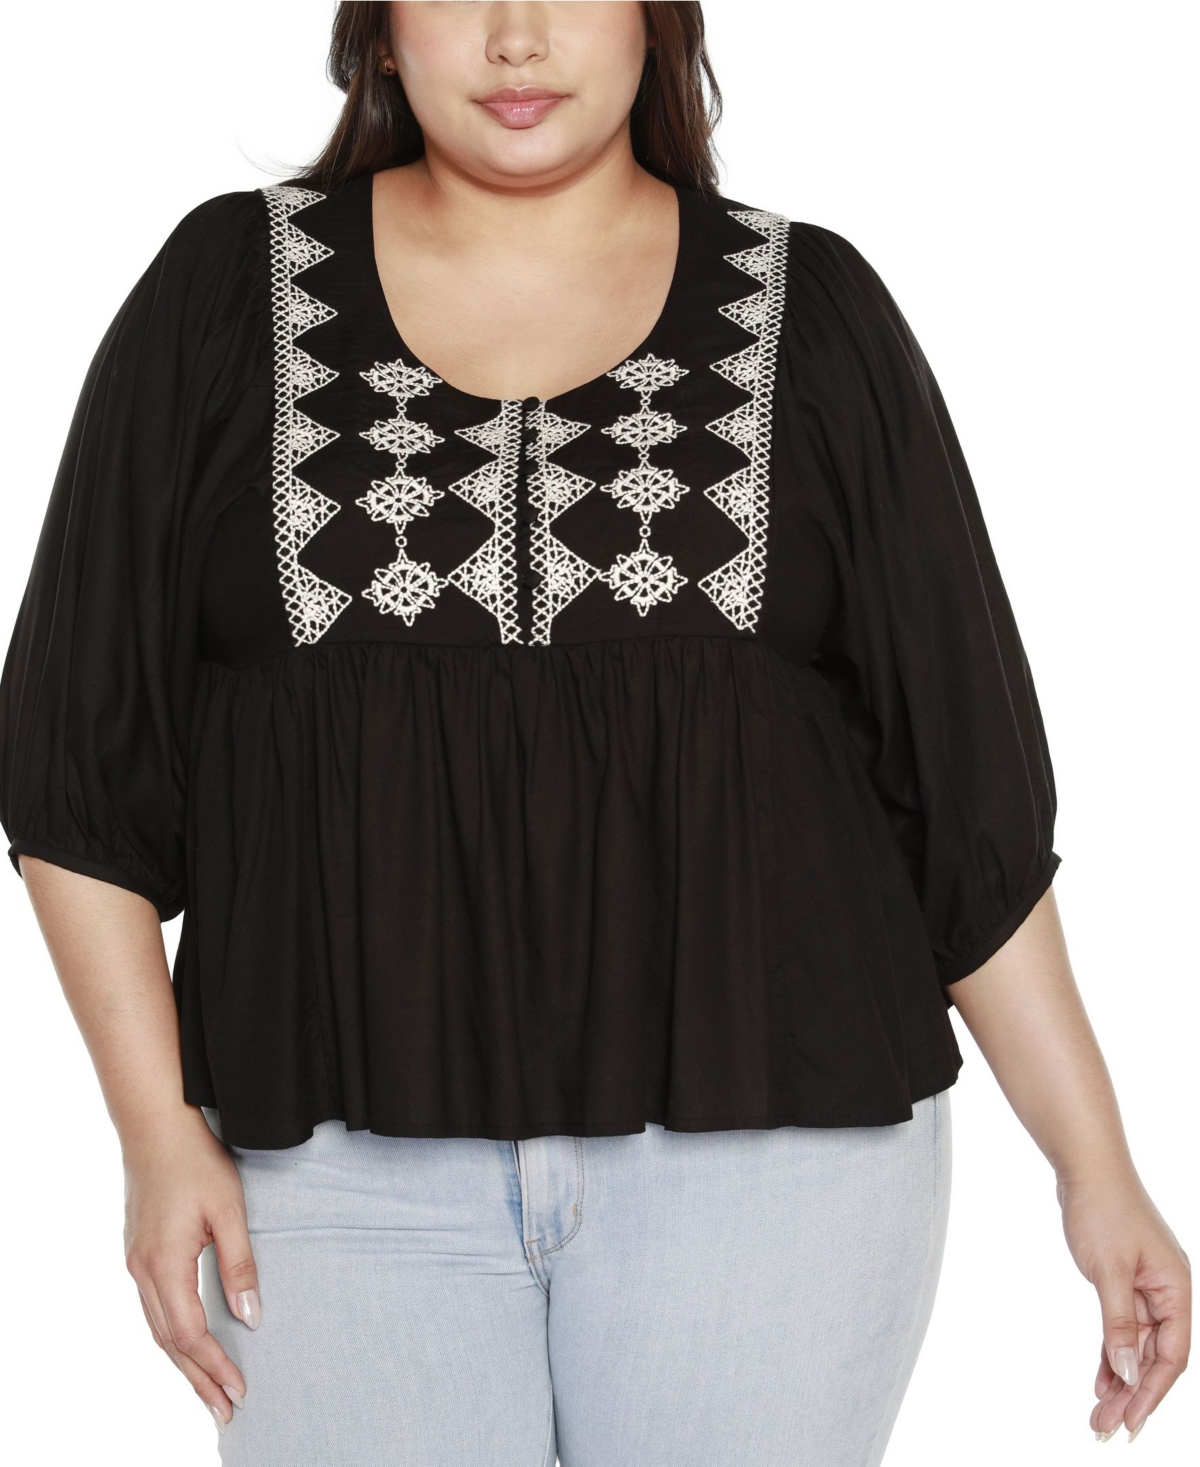 Black Label Plus Size Embroidered Boho Fit and Flare Top - White